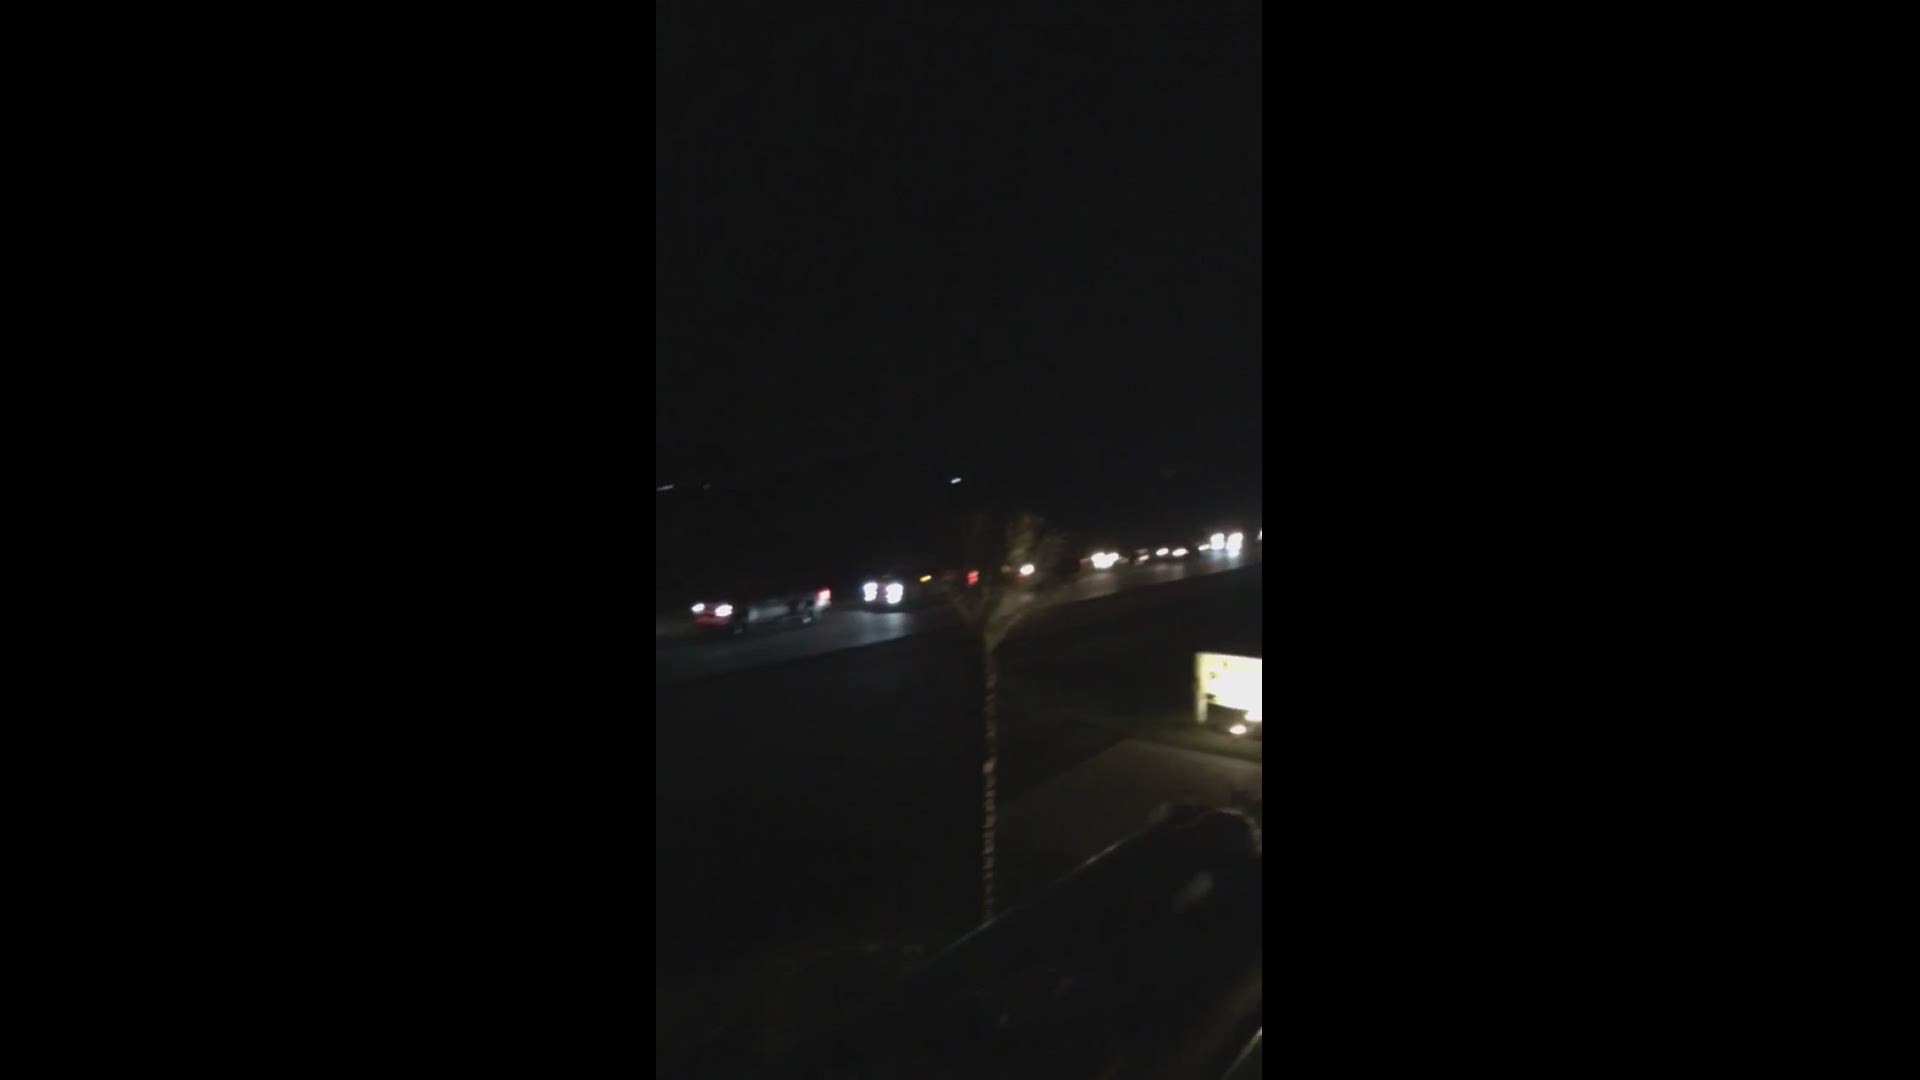 Here's a video from a viewer of the emergency response vehicles